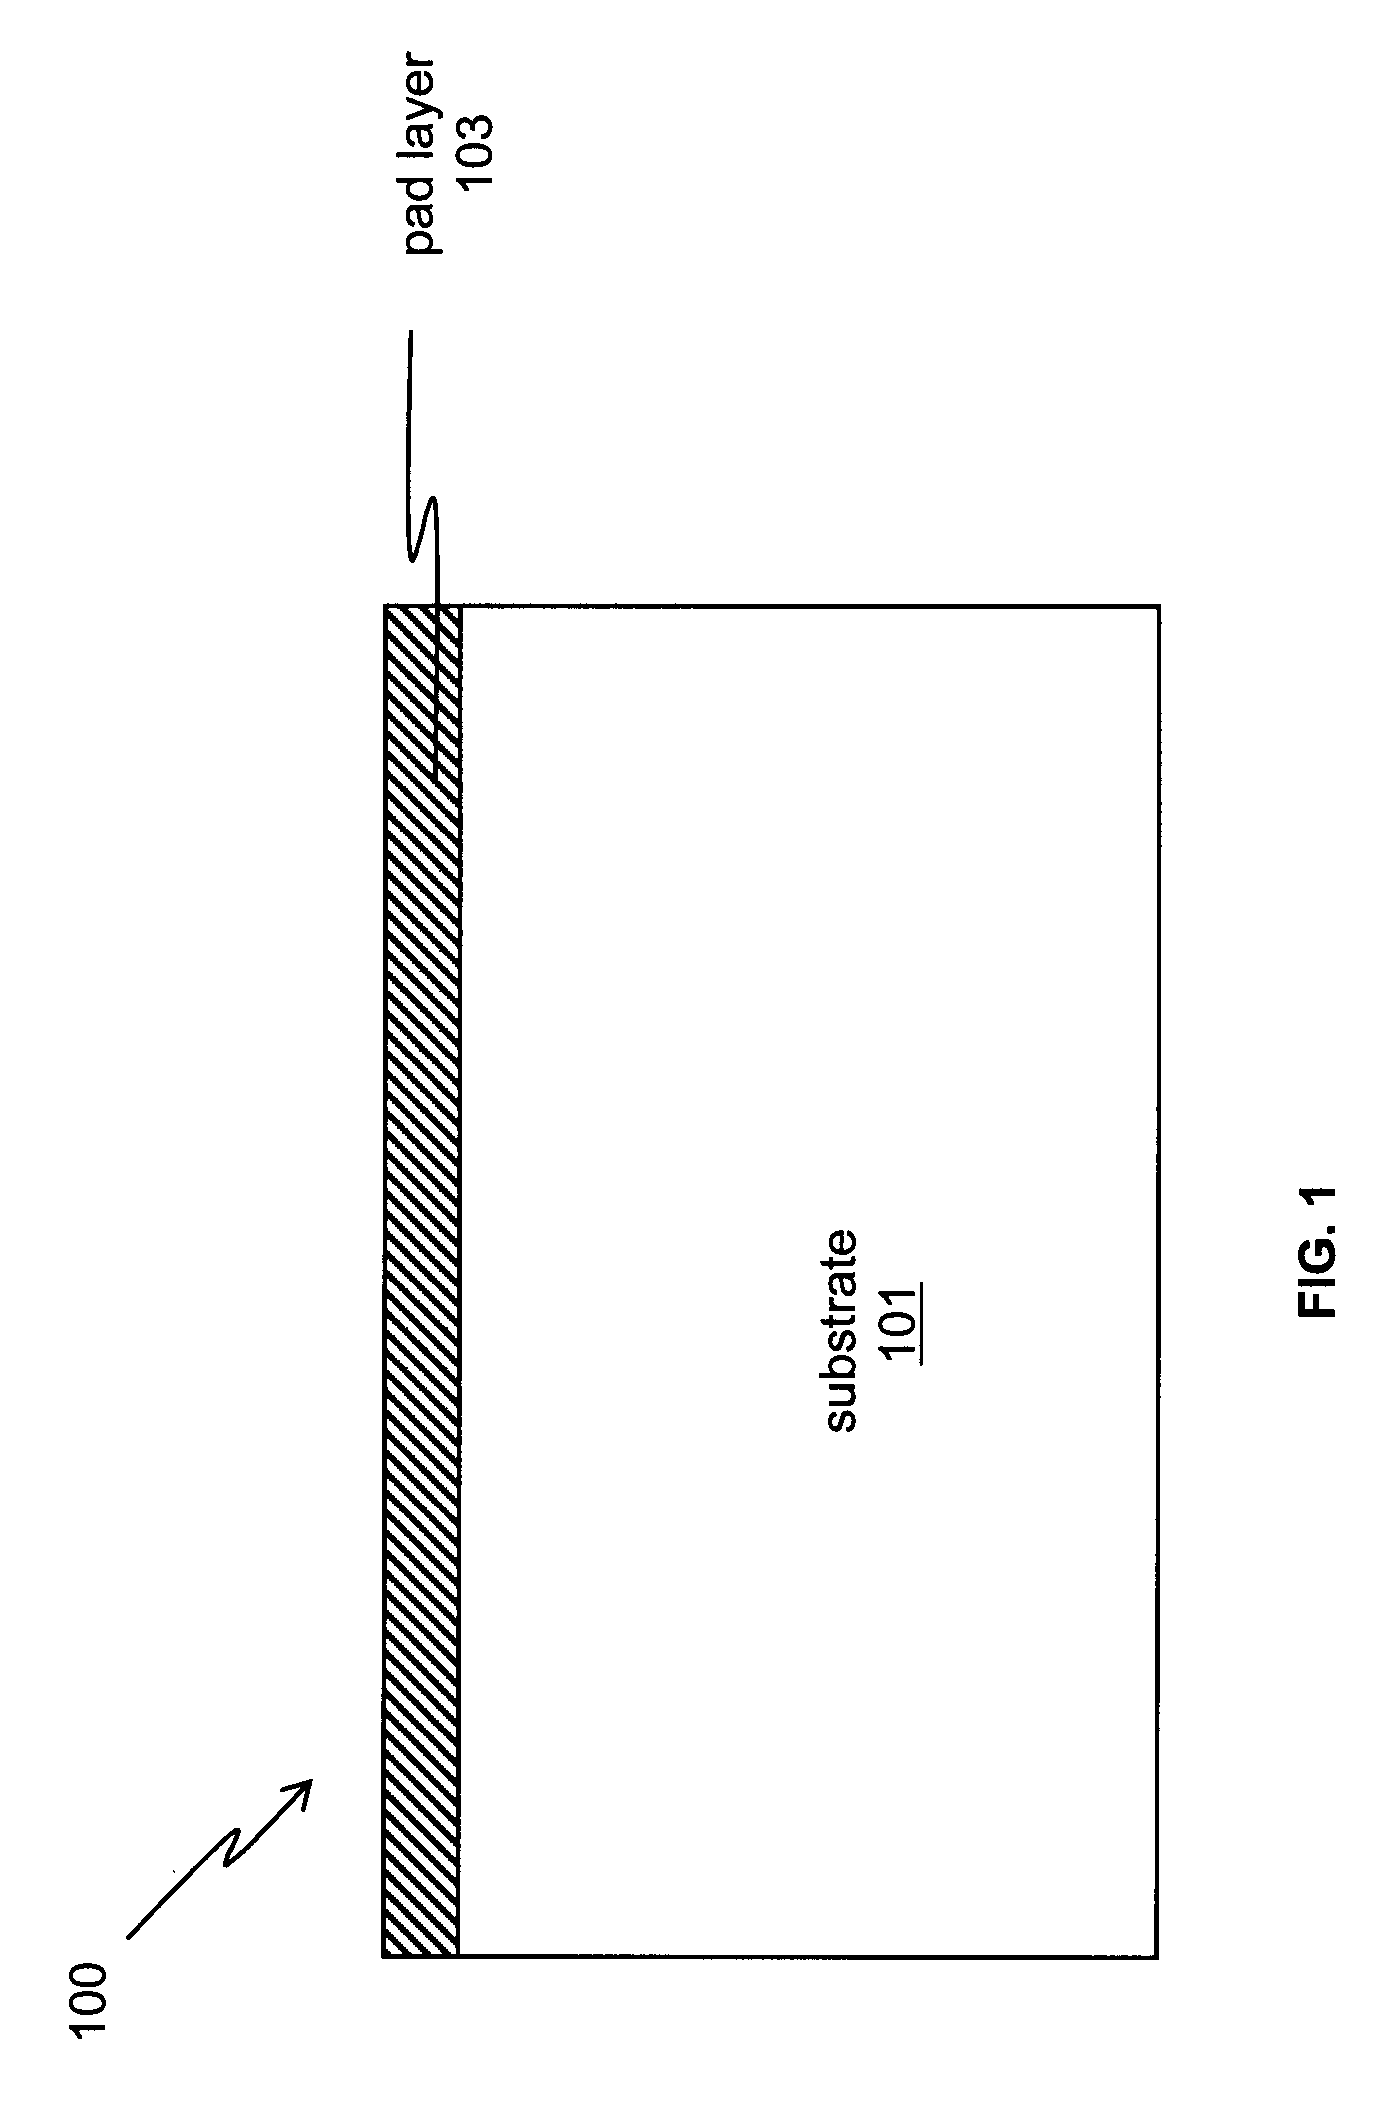 Patterned strained semiconductor substrate and device